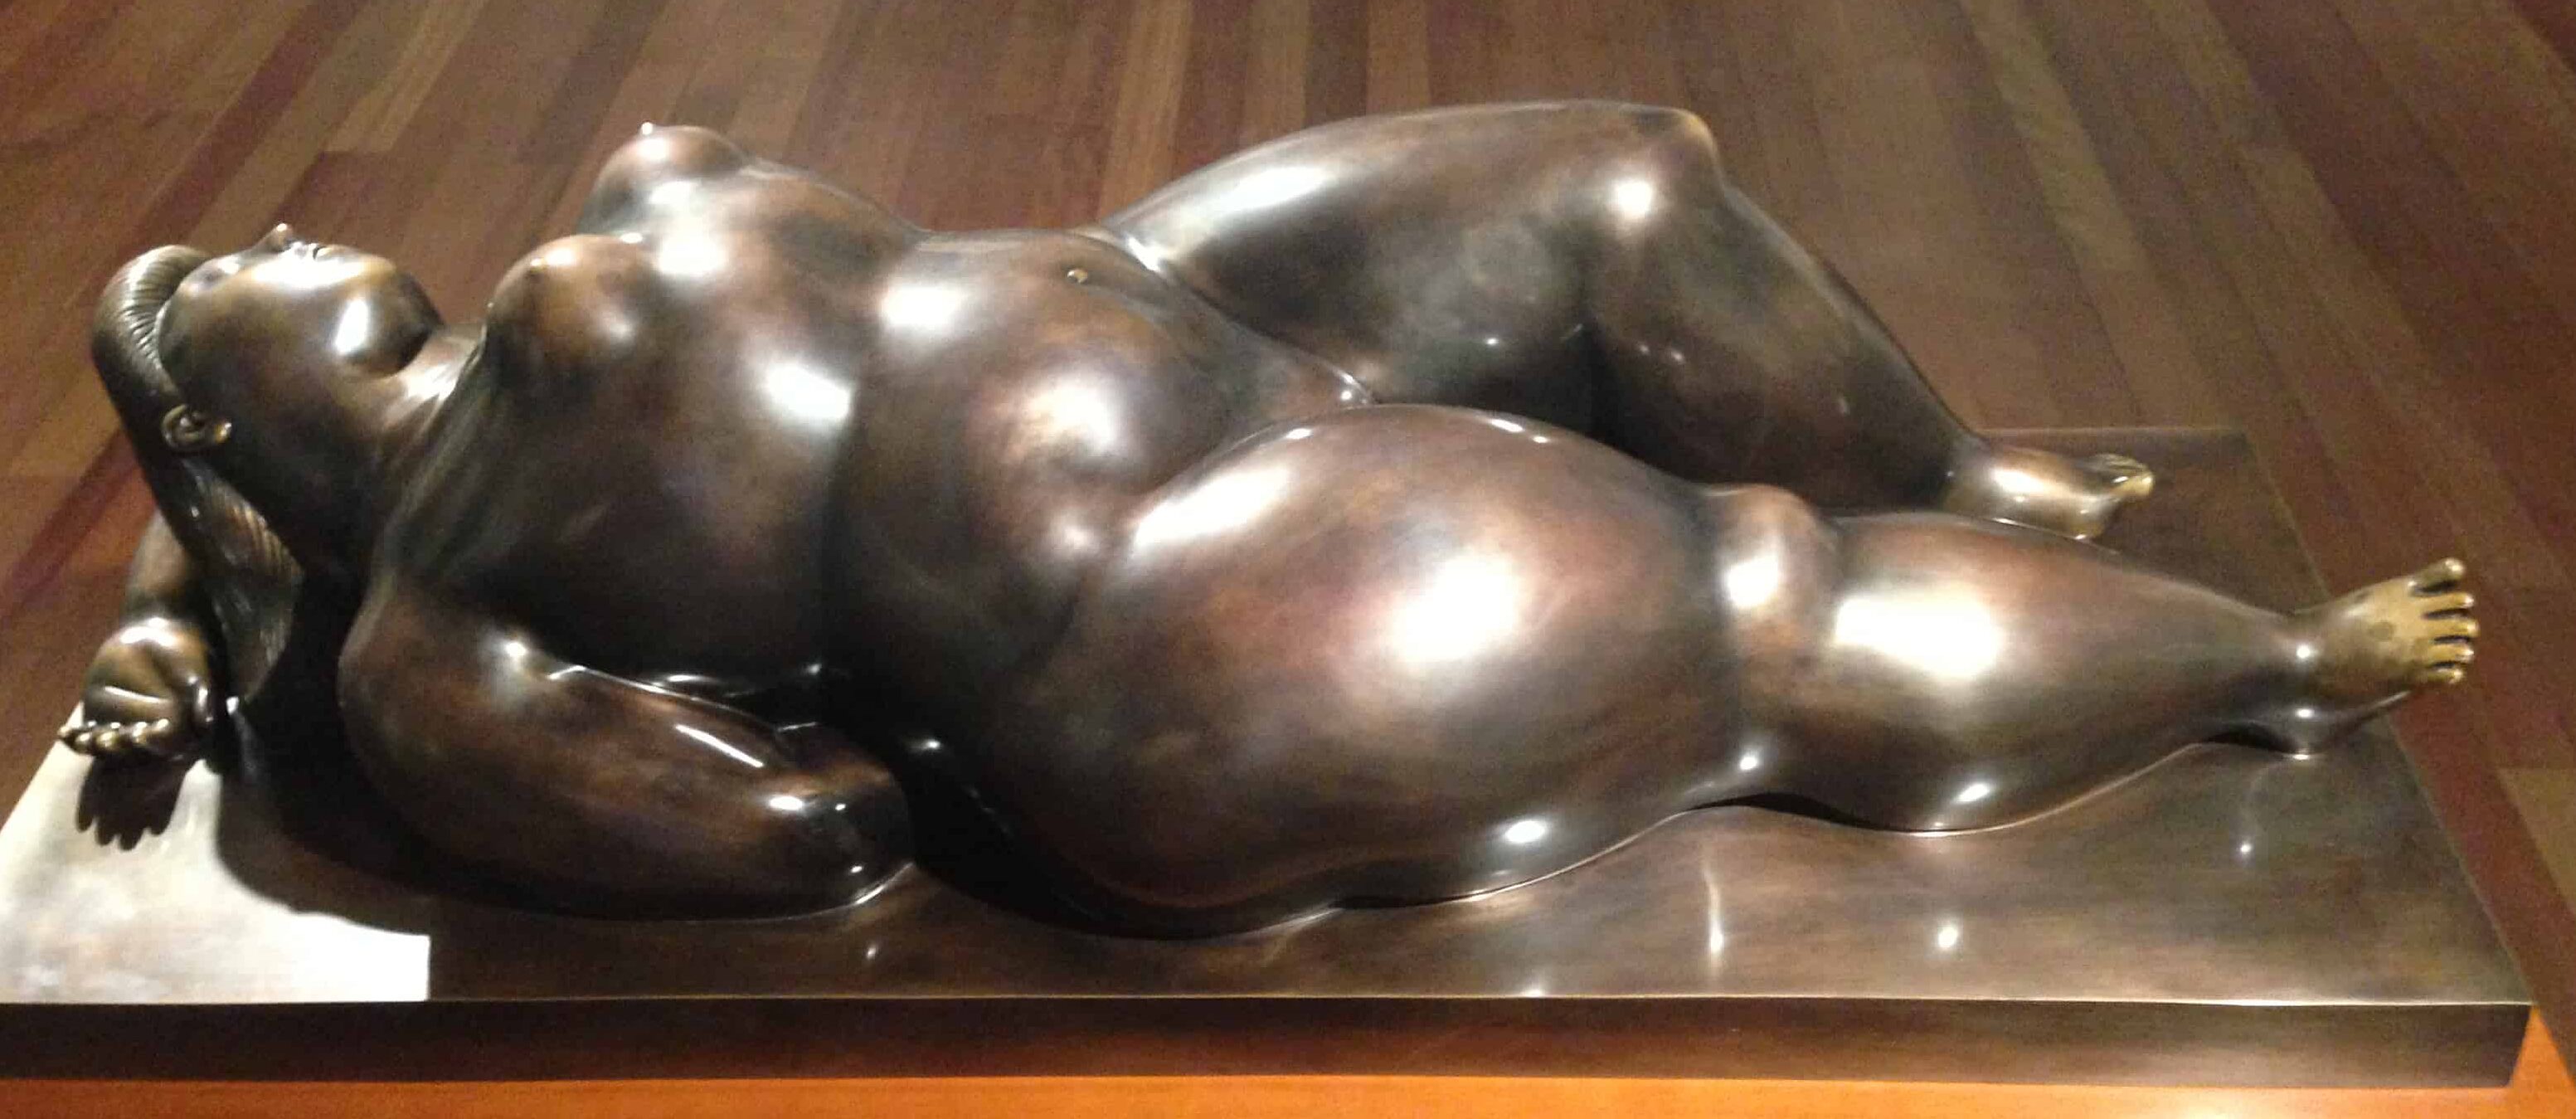 Sculpture at the Botero Museum